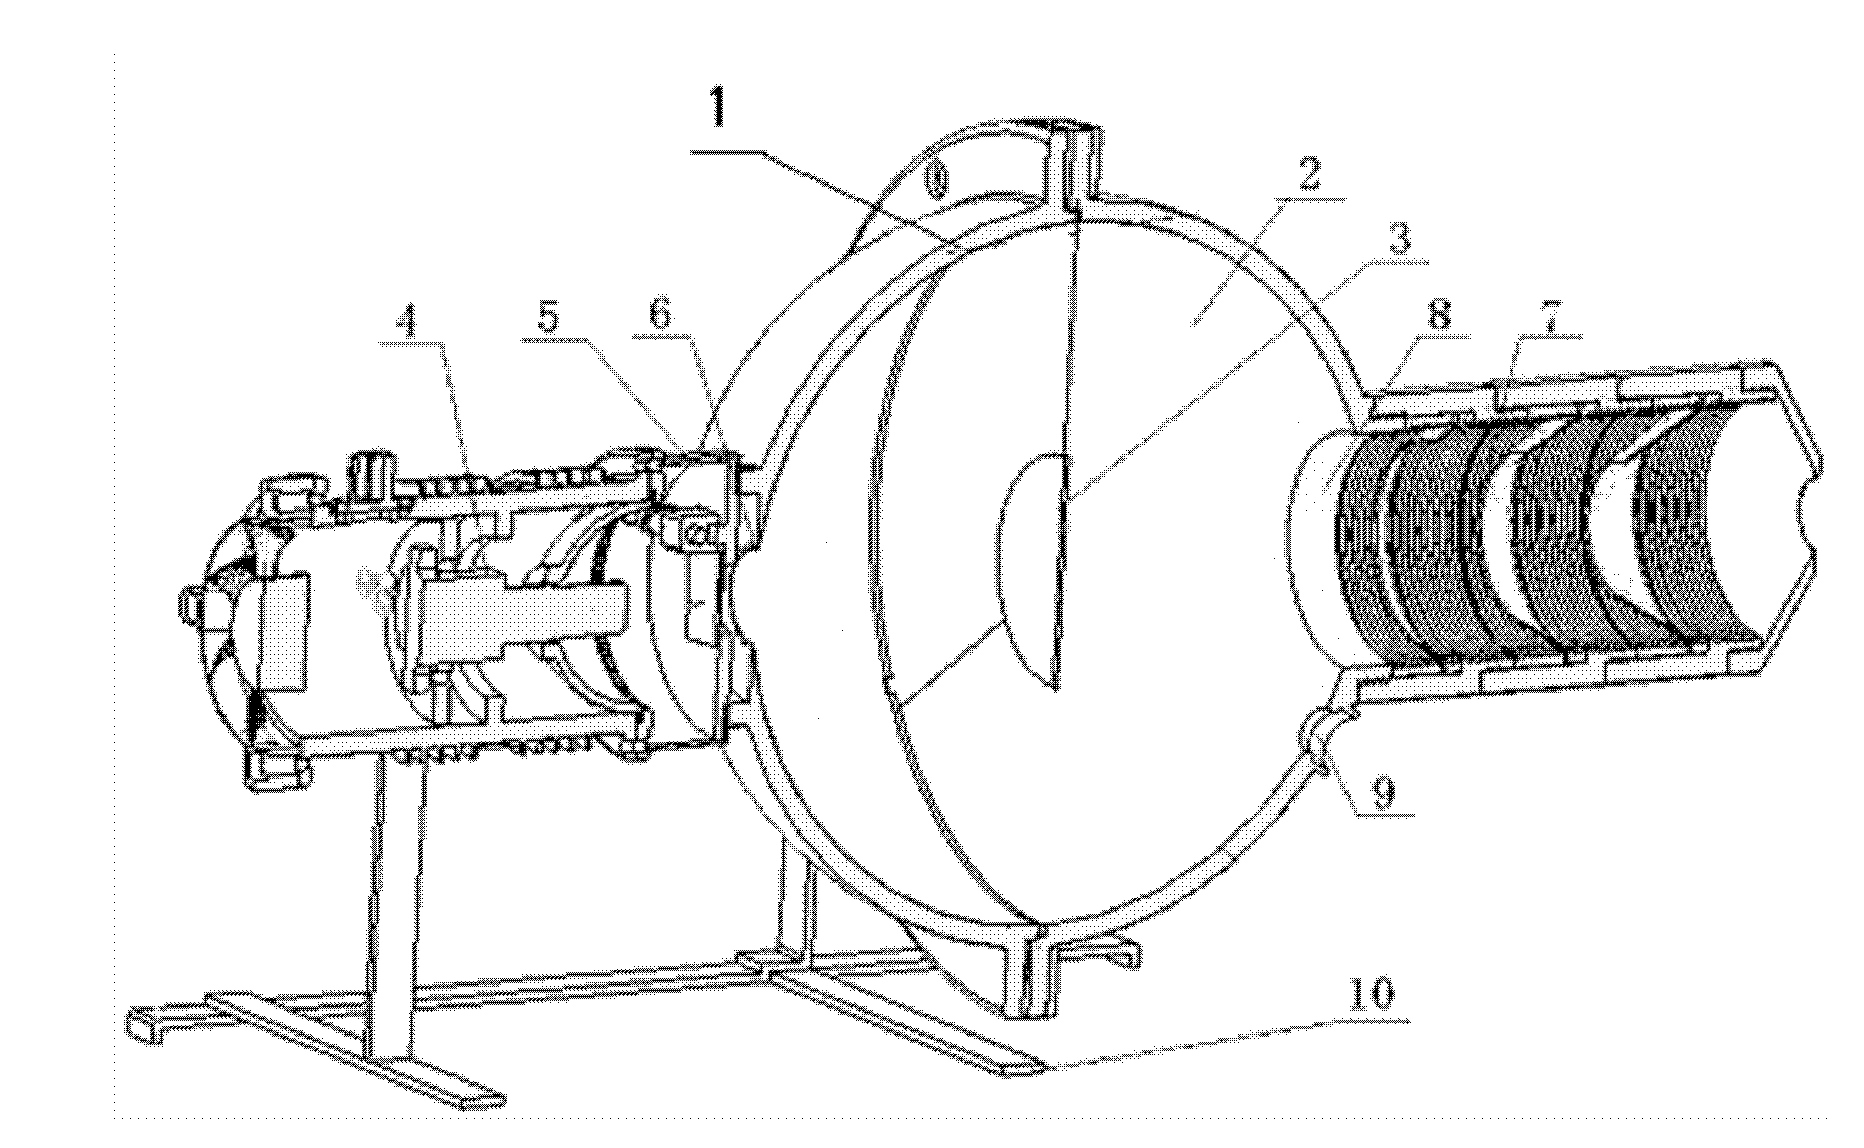 Integrating sphere device for optical measurement